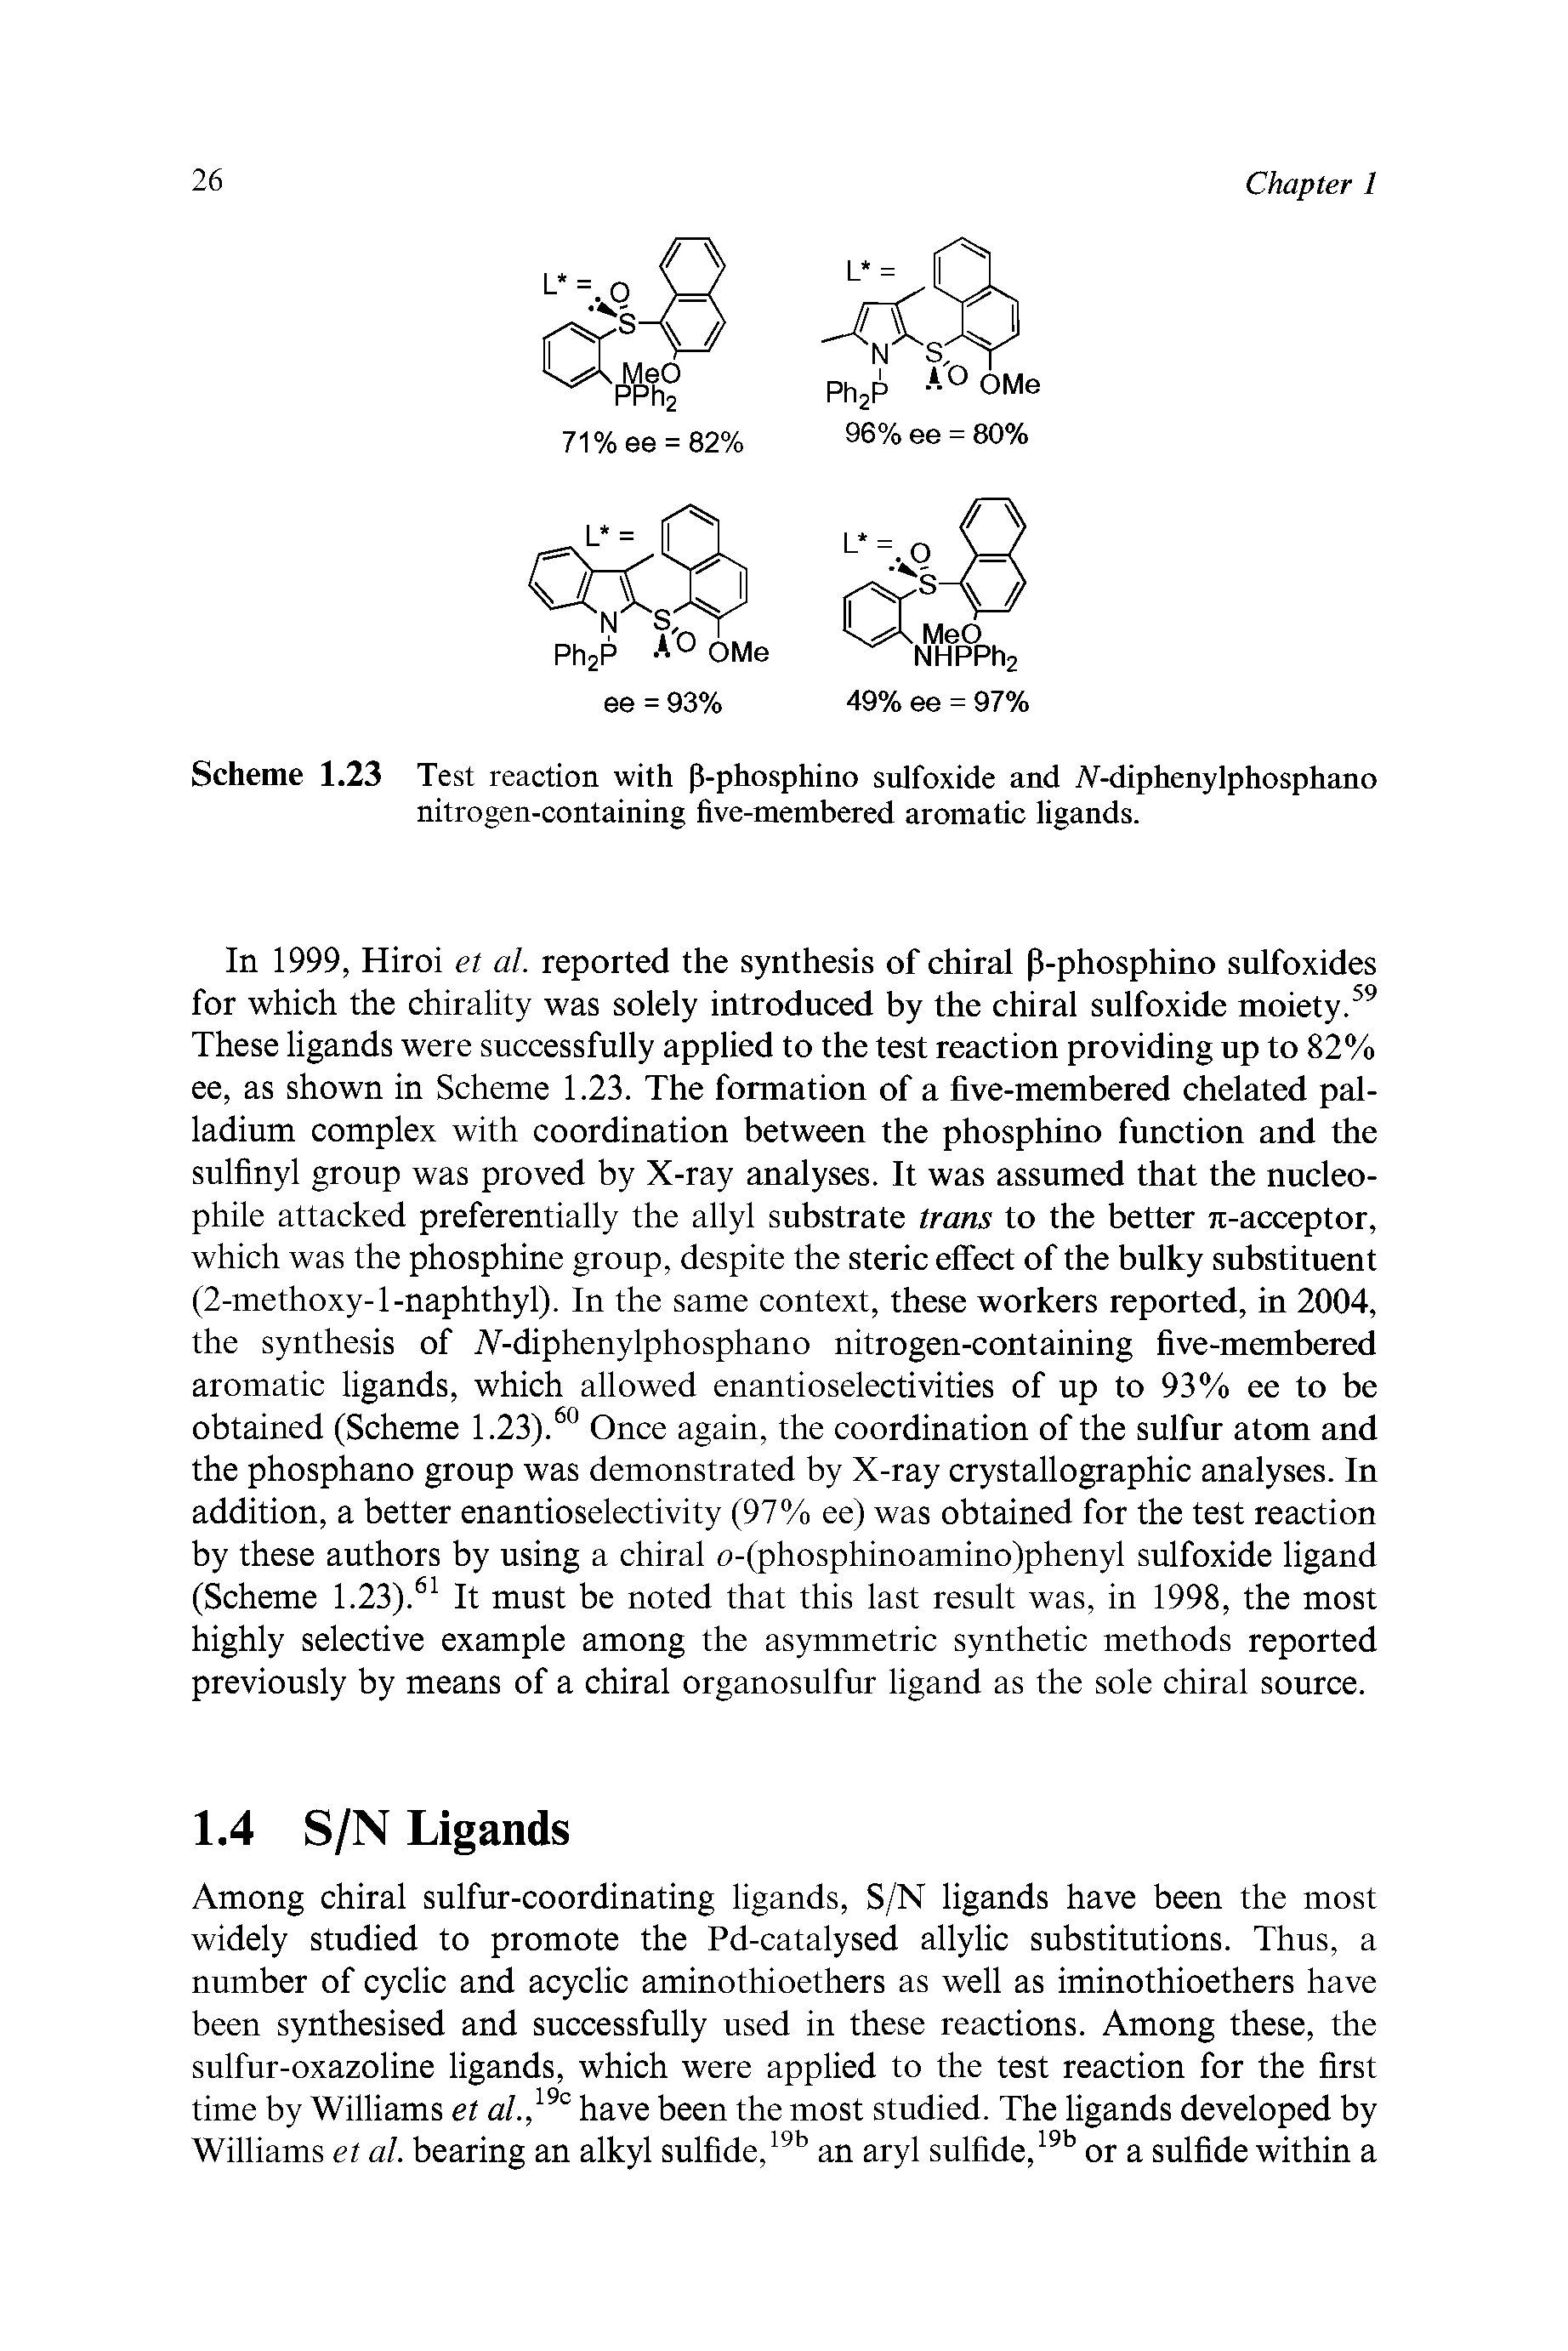 Scheme 1.23 Test reaction with P-phosphino sulfoxide and Af-diphenylphosphano nitrogen-containing five-membered aromatic ligands.